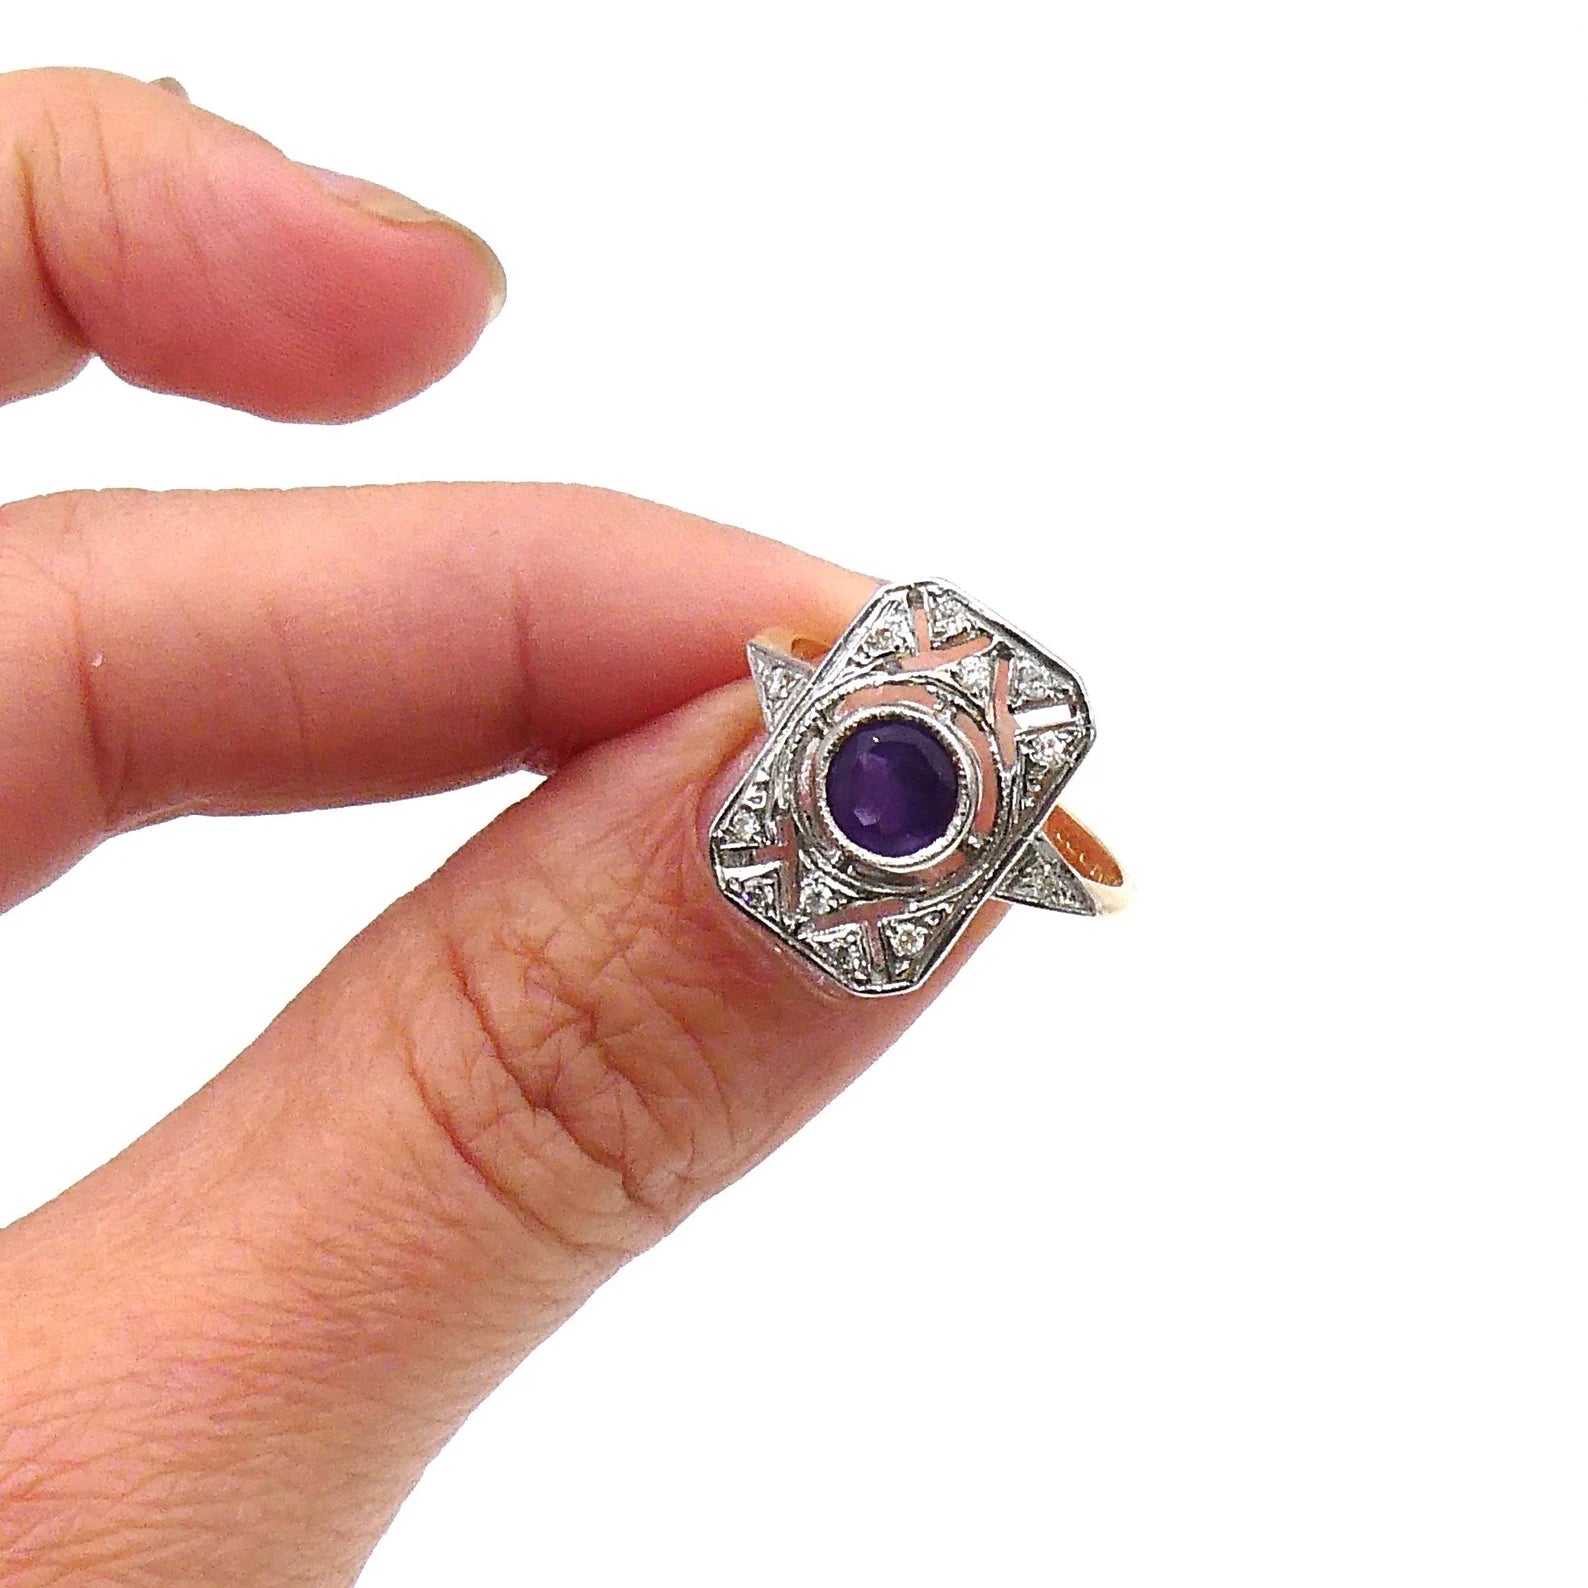 Art Deco style Amethyst diamond ring with an openwork design 18kt gold. - Collected